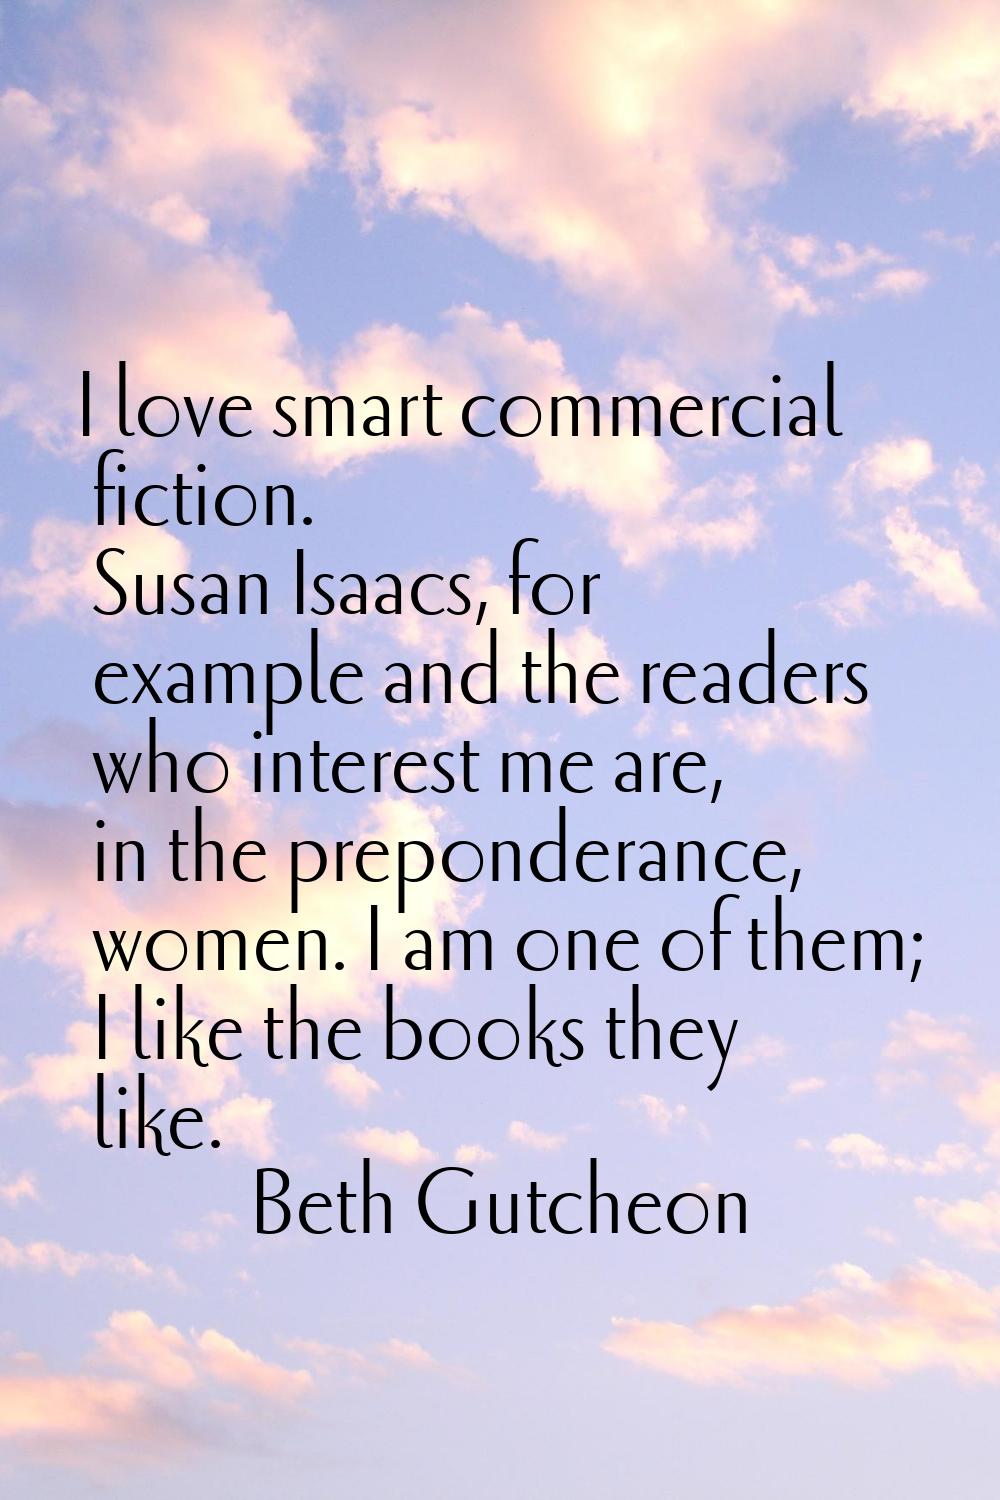 I love smart commercial fiction. Susan Isaacs, for example and the readers who interest me are, in 